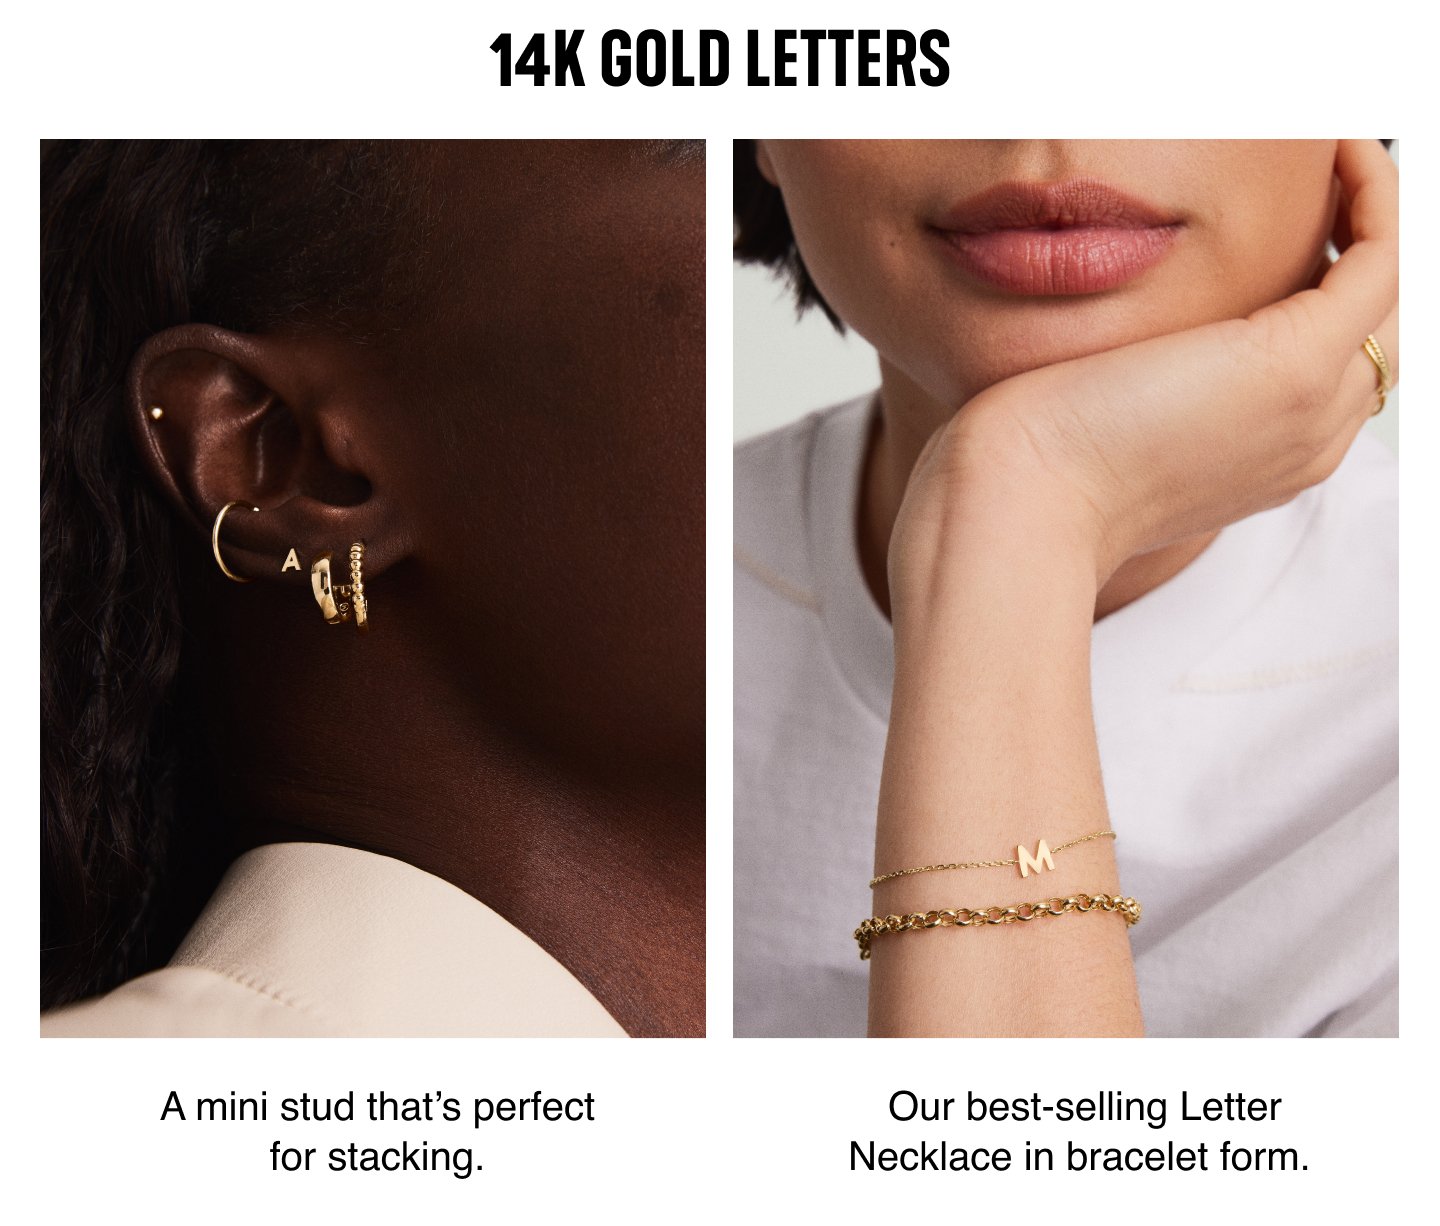 14k Gold Letters. A mini stud that's perfect for stacking. Our best-selling Letter Necklace in bracelet form.